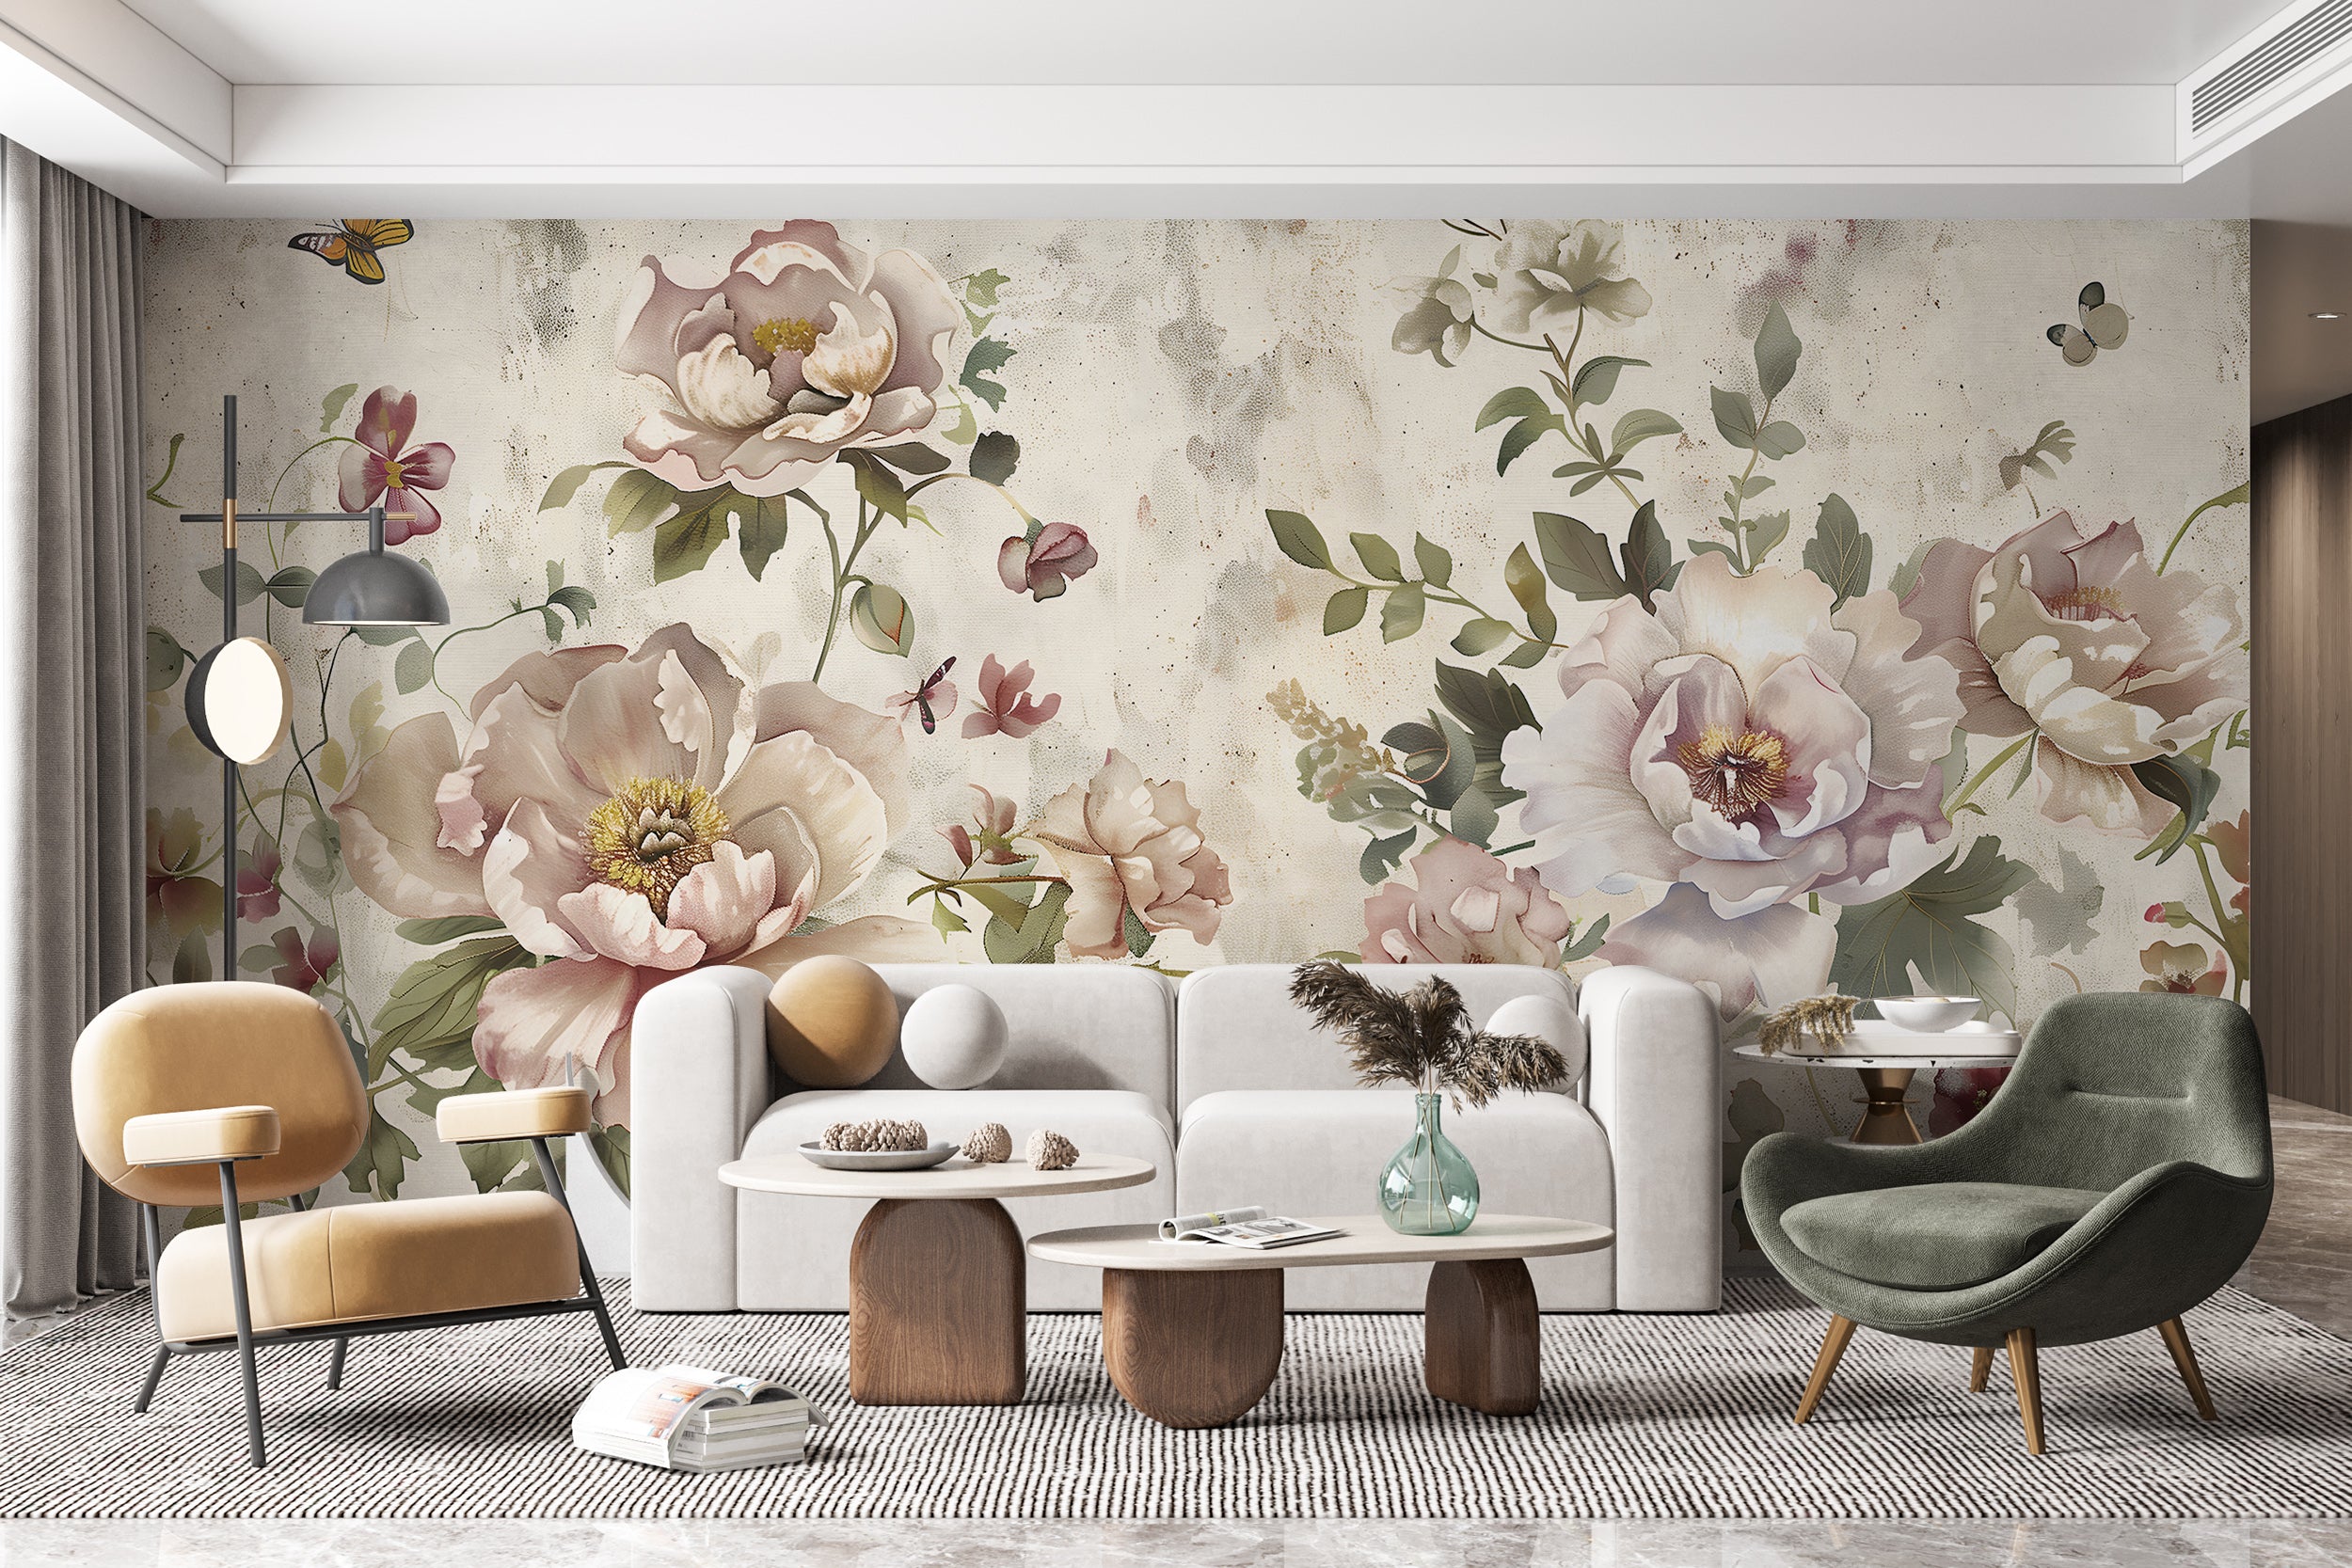 Large Flowers Wall Mural, Peel and Stick Floral Wallpaper, Beige Flowers and Butterflies Mural, Pink Flowers and Green Leaves Wall Decor